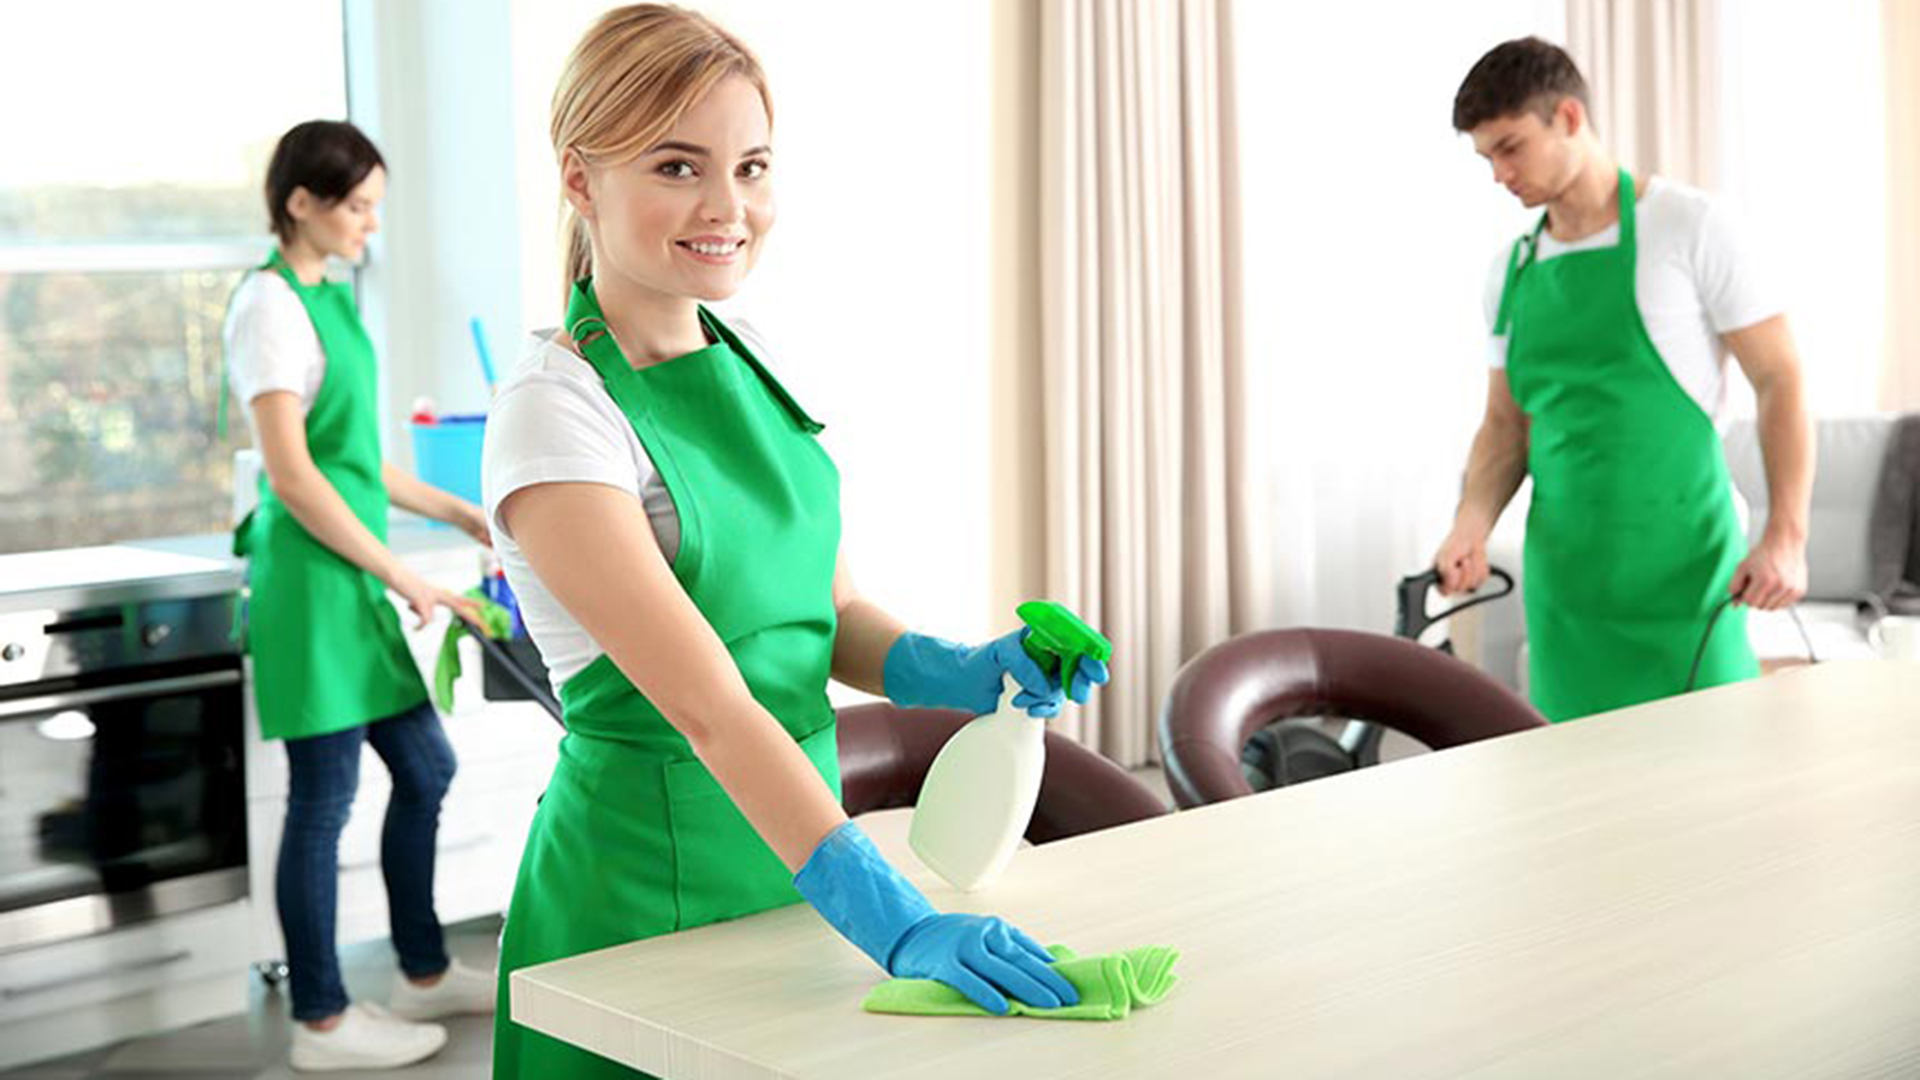 What You Should Be Looking for in a Cleaning Company 